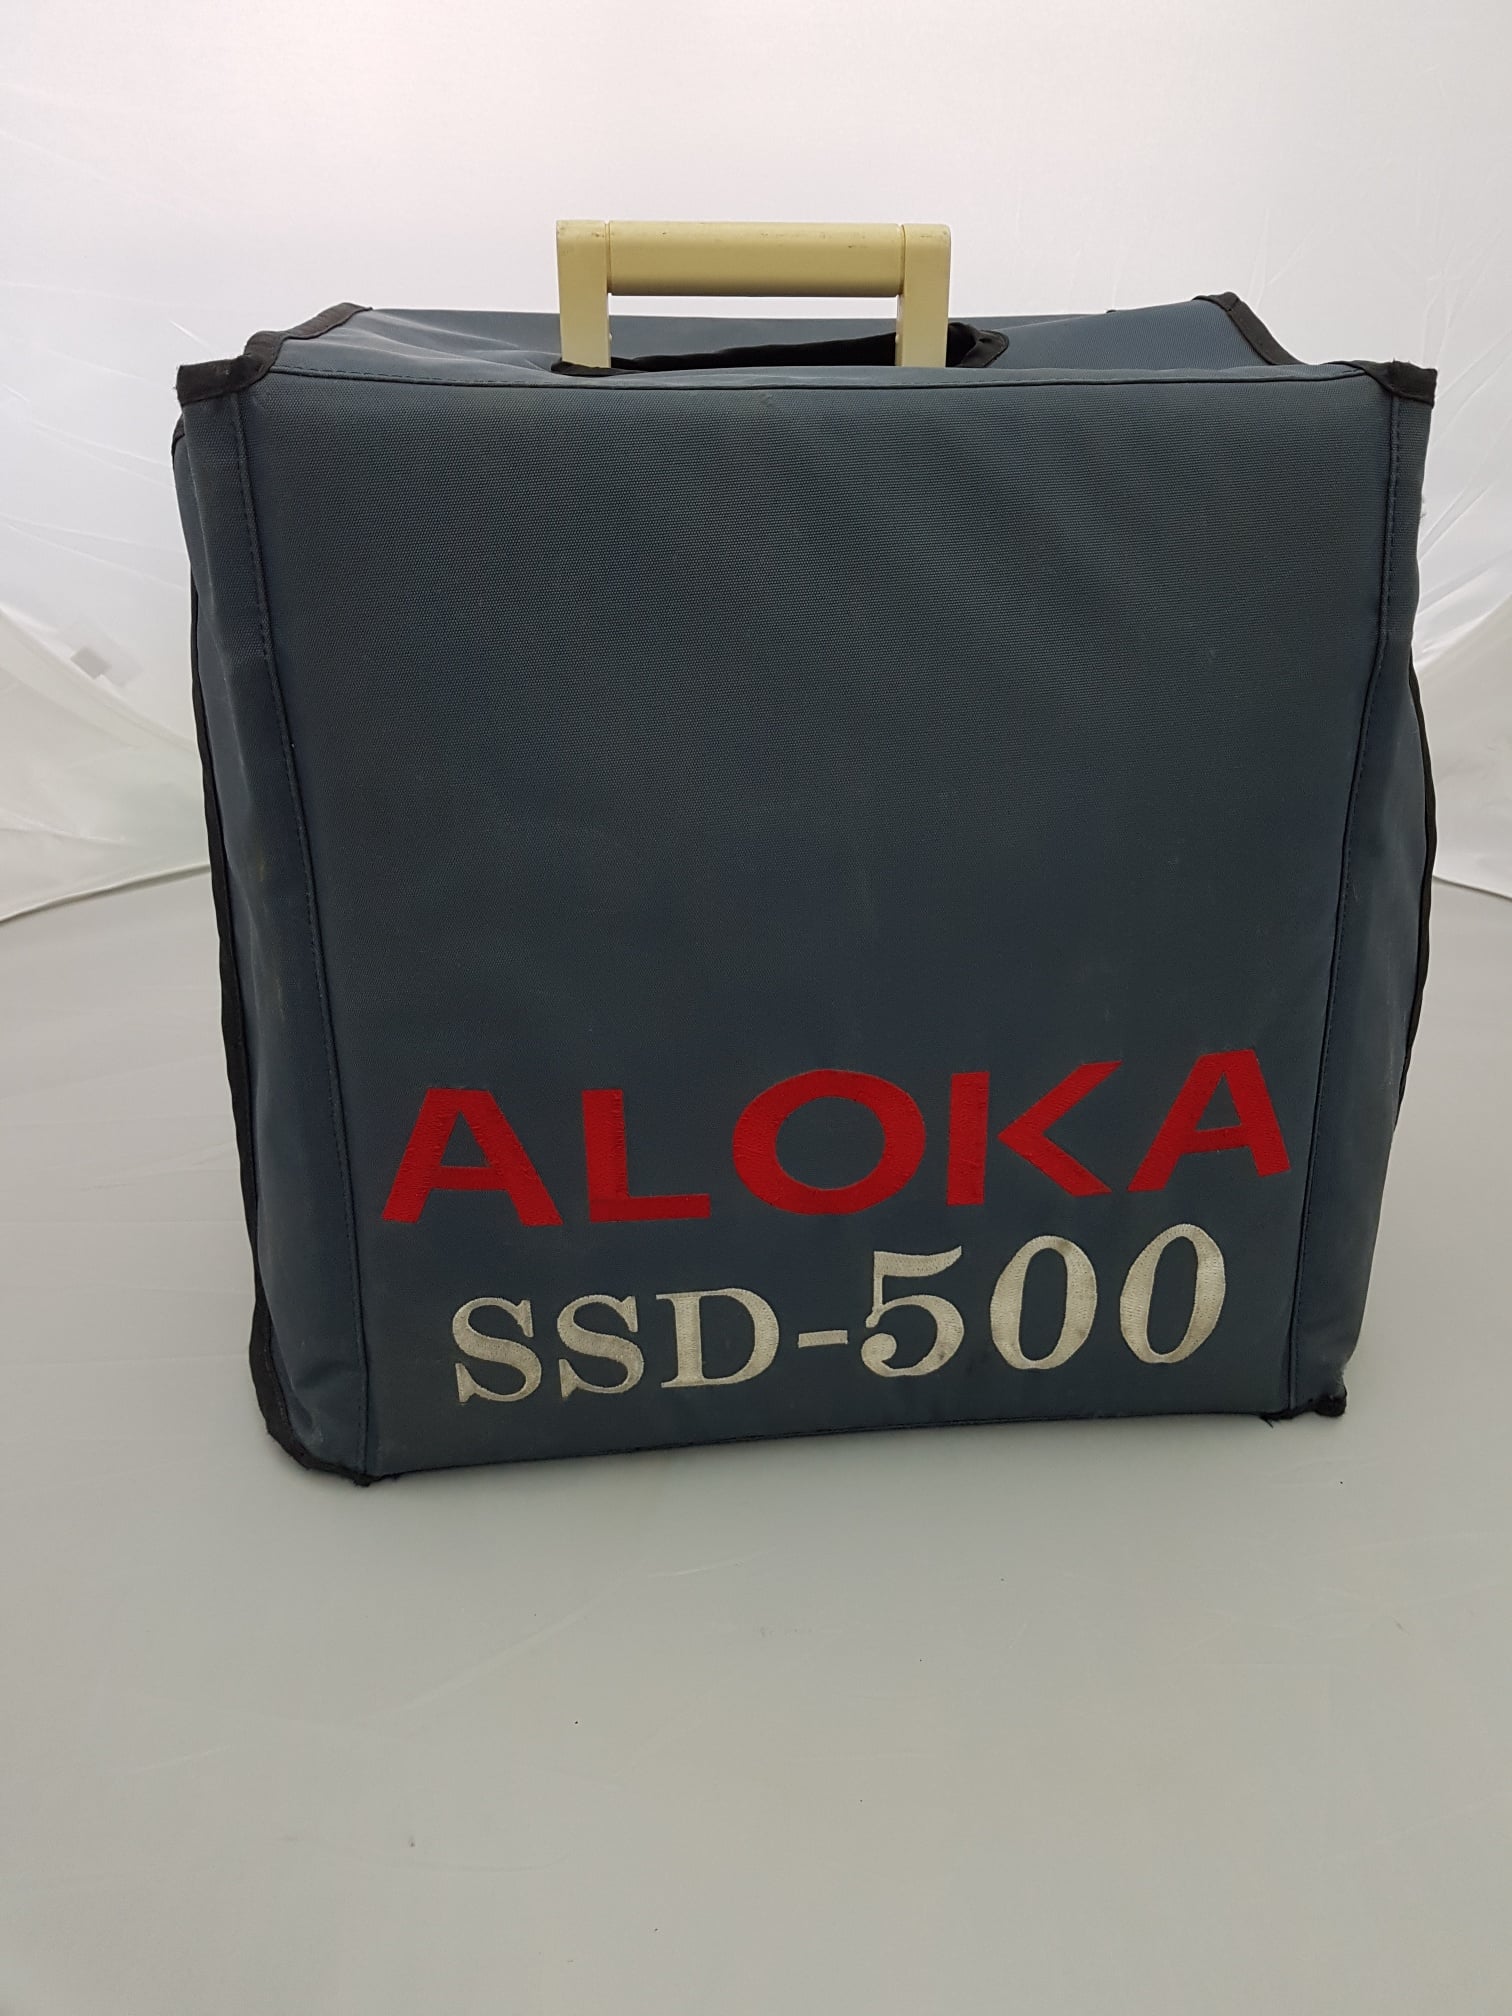 Aloka - SSD-500 Community, Manuals and Specifications